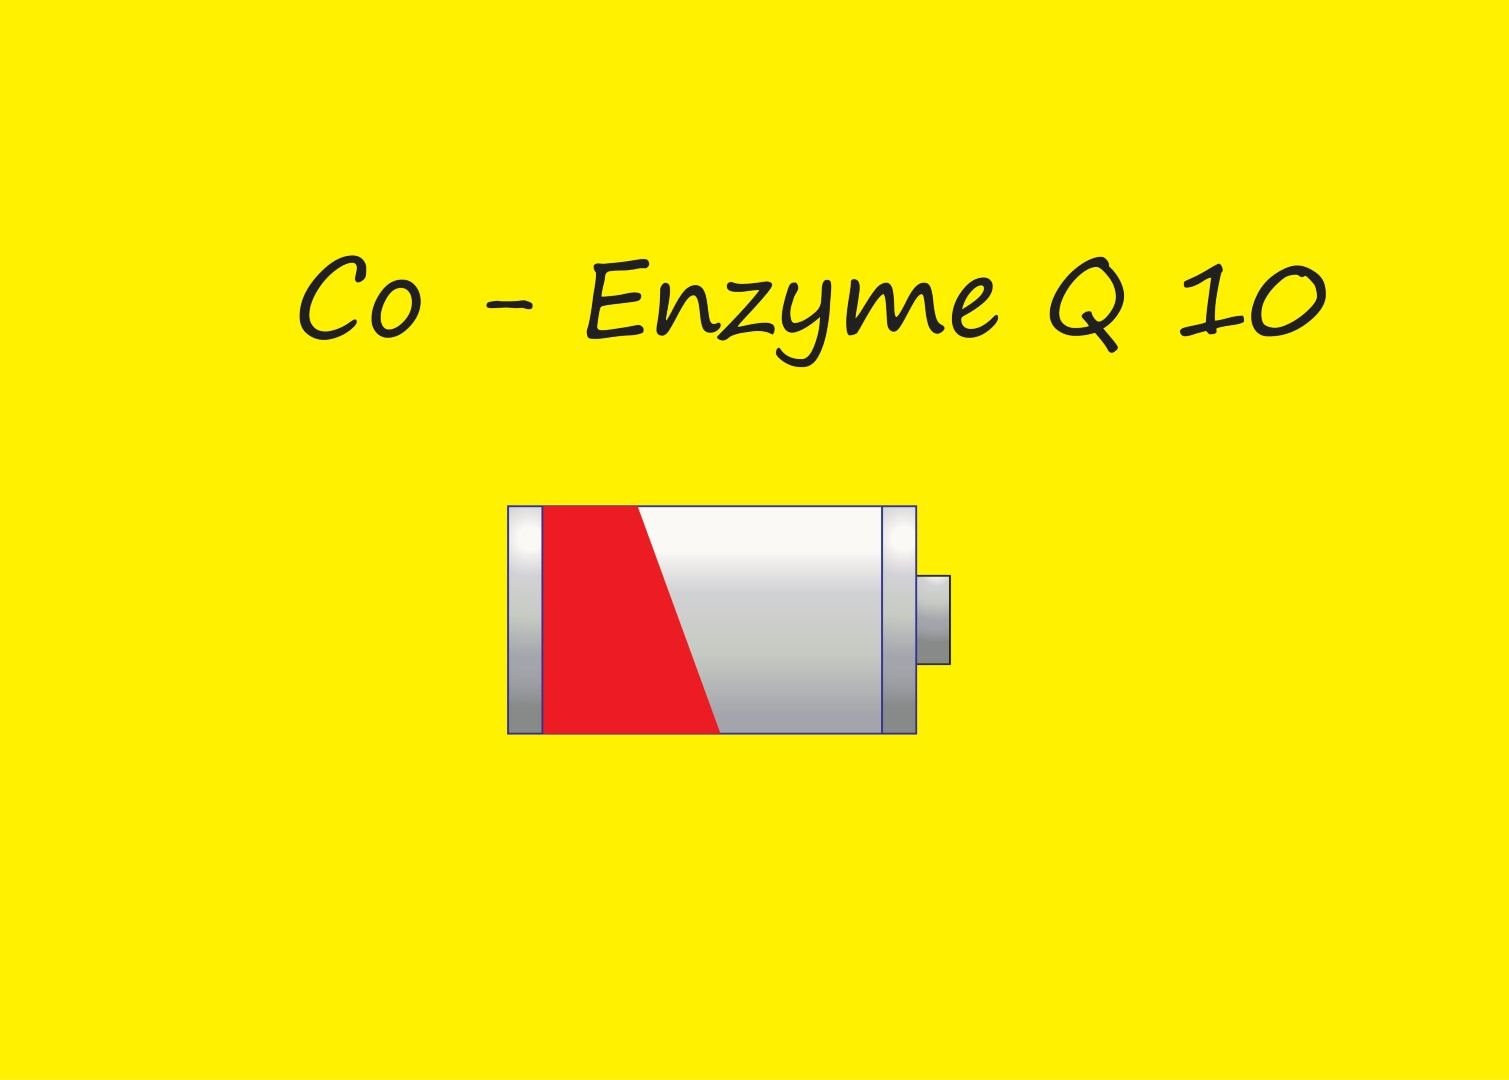 Suffering from fatigue? – Check your Co-enzyme Q10 levels!